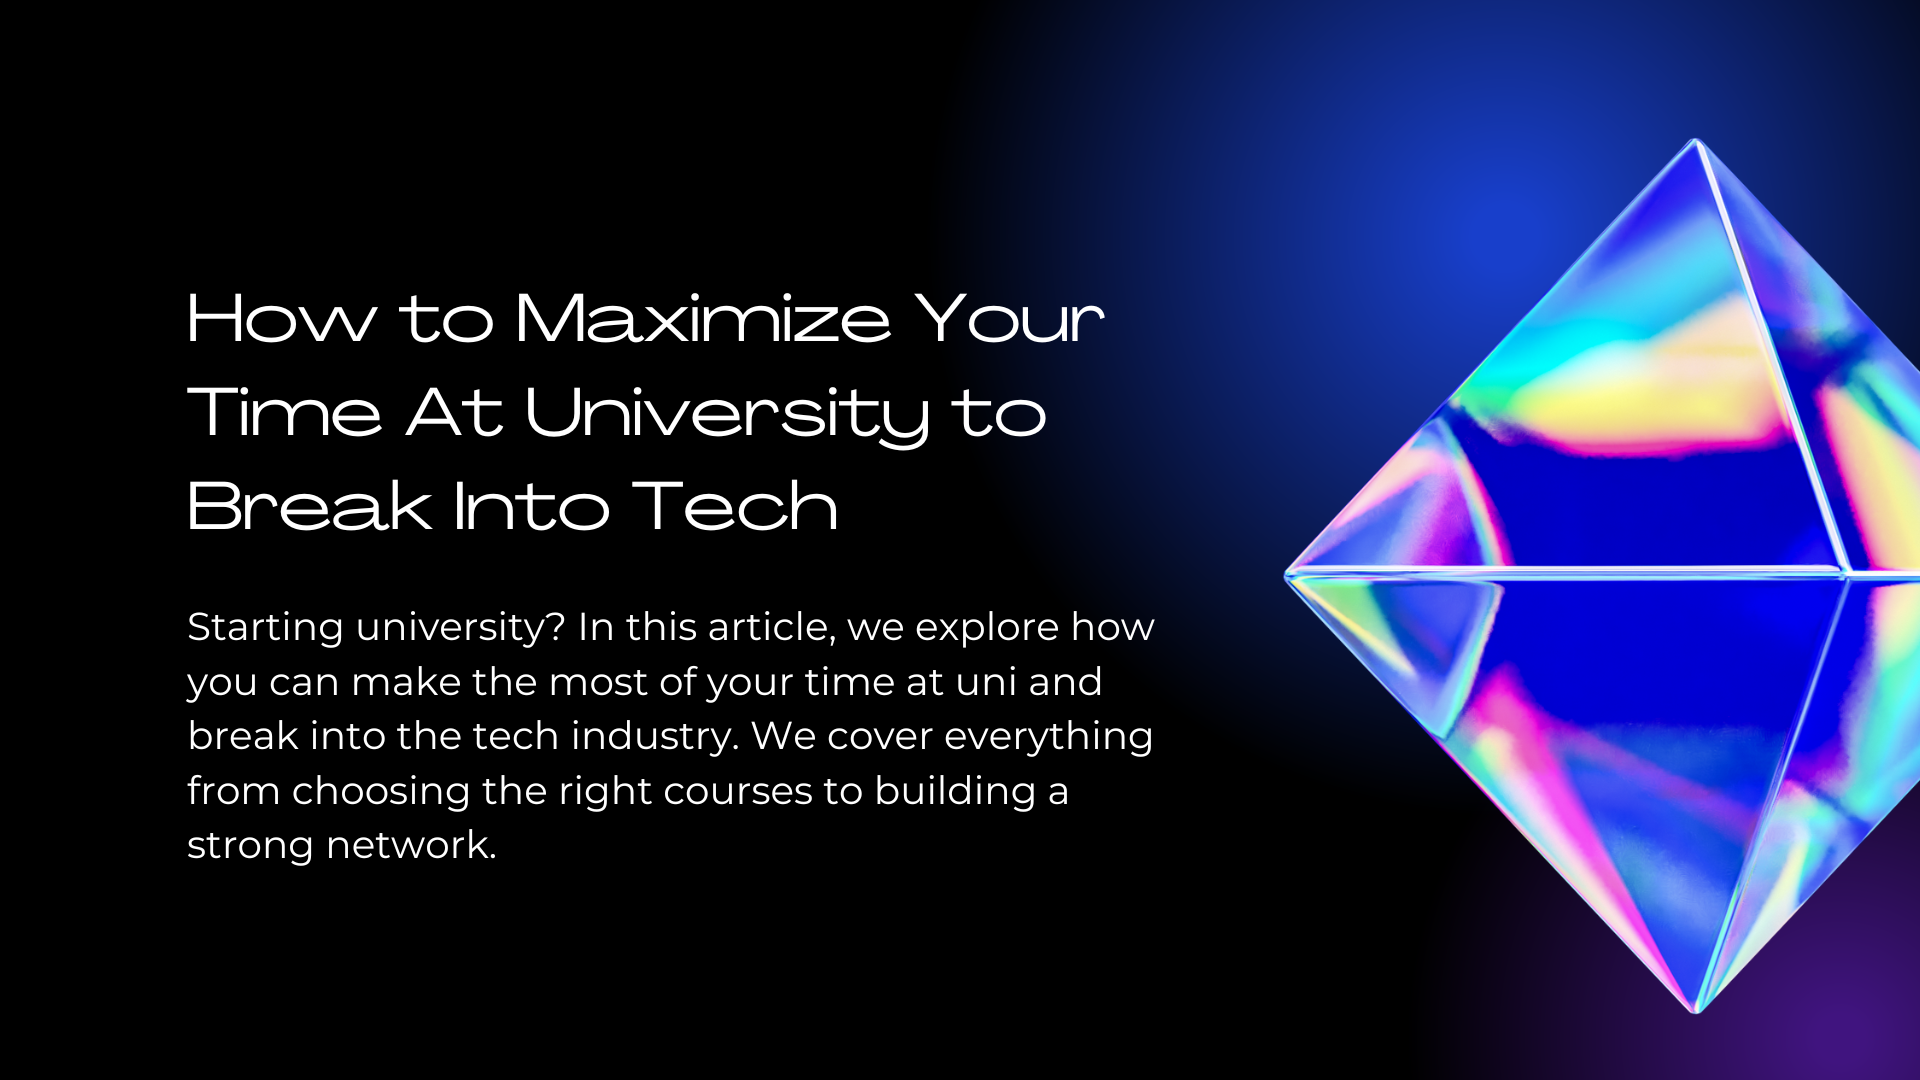 How to Maximize Your Time At University to Break Into Tech